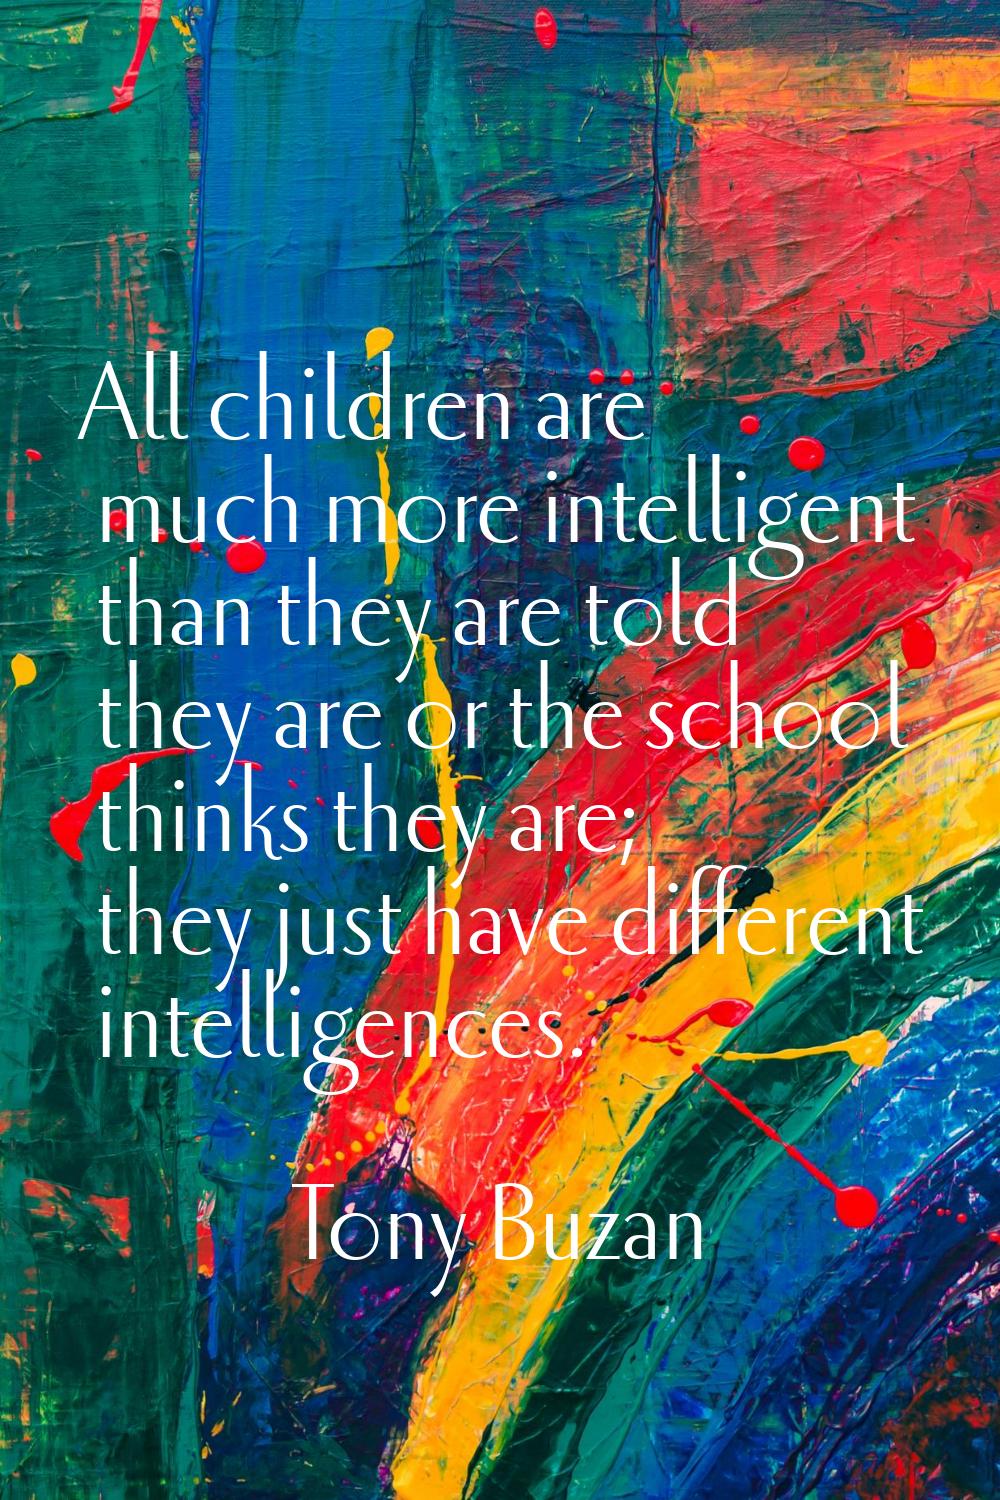 All children are much more intelligent than they are told they are or the school thinks they are; t